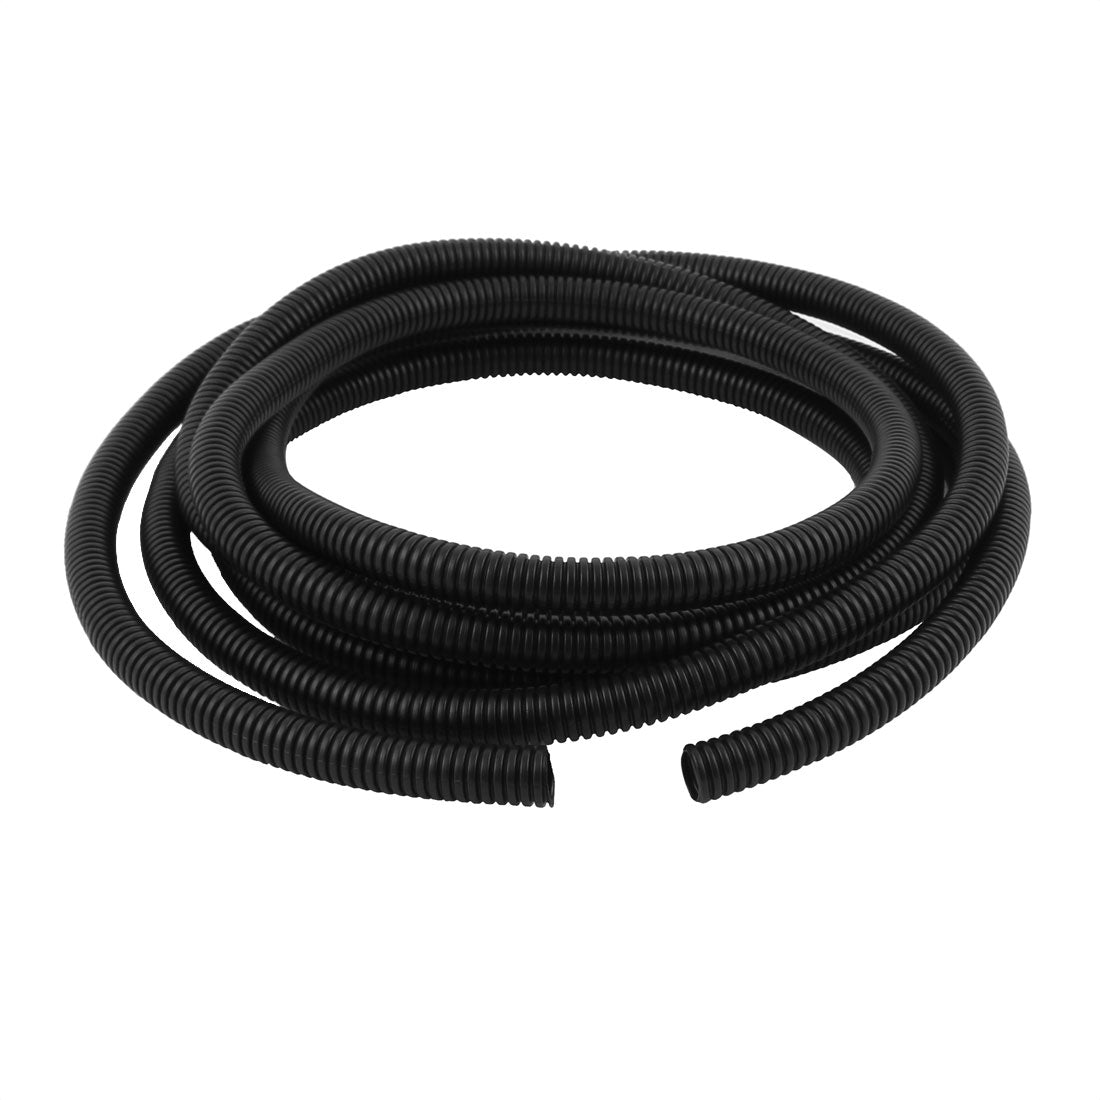 uxcell Uxcell 3.5 M 11 x 13 mm PVC Split Corrugated Conduit Tube for Garden,Office Black